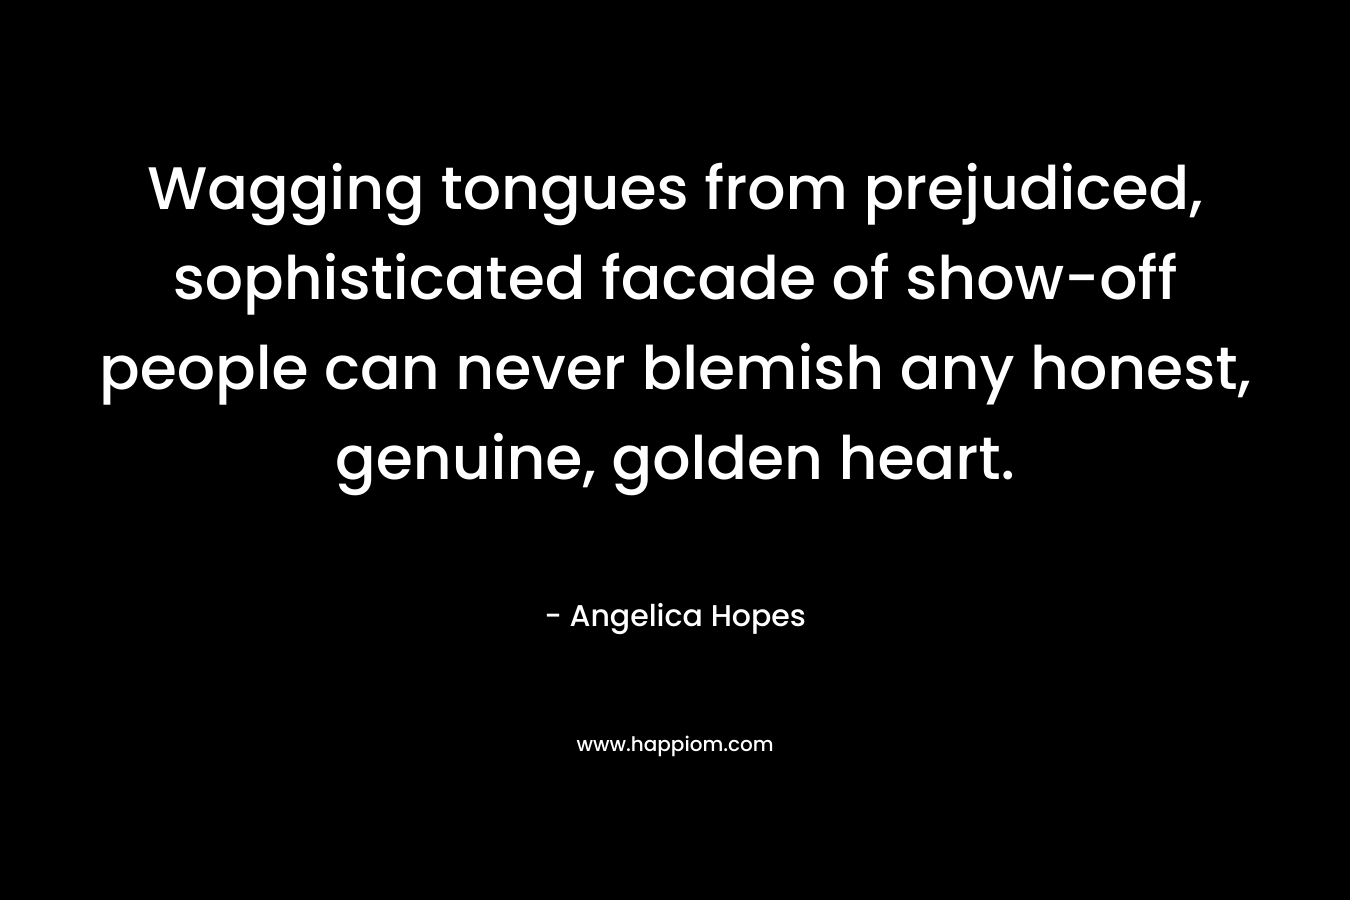 Wagging tongues from prejudiced, sophisticated facade of show-off people can never blemish any honest, genuine, golden heart. – Angelica Hopes